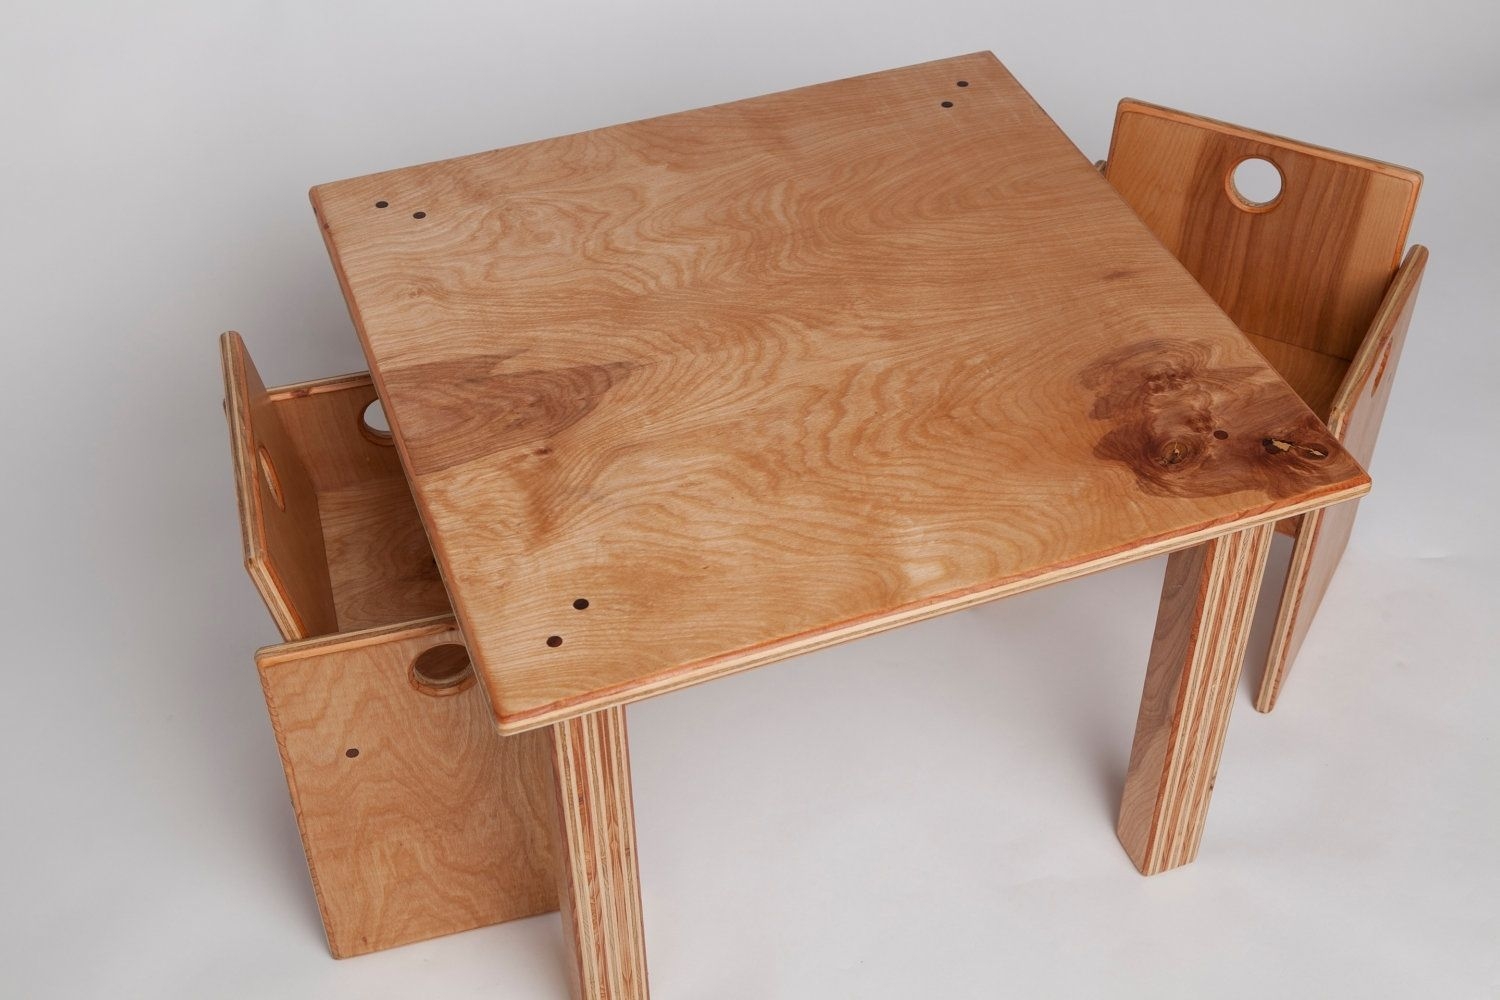 wooden play table and chairs